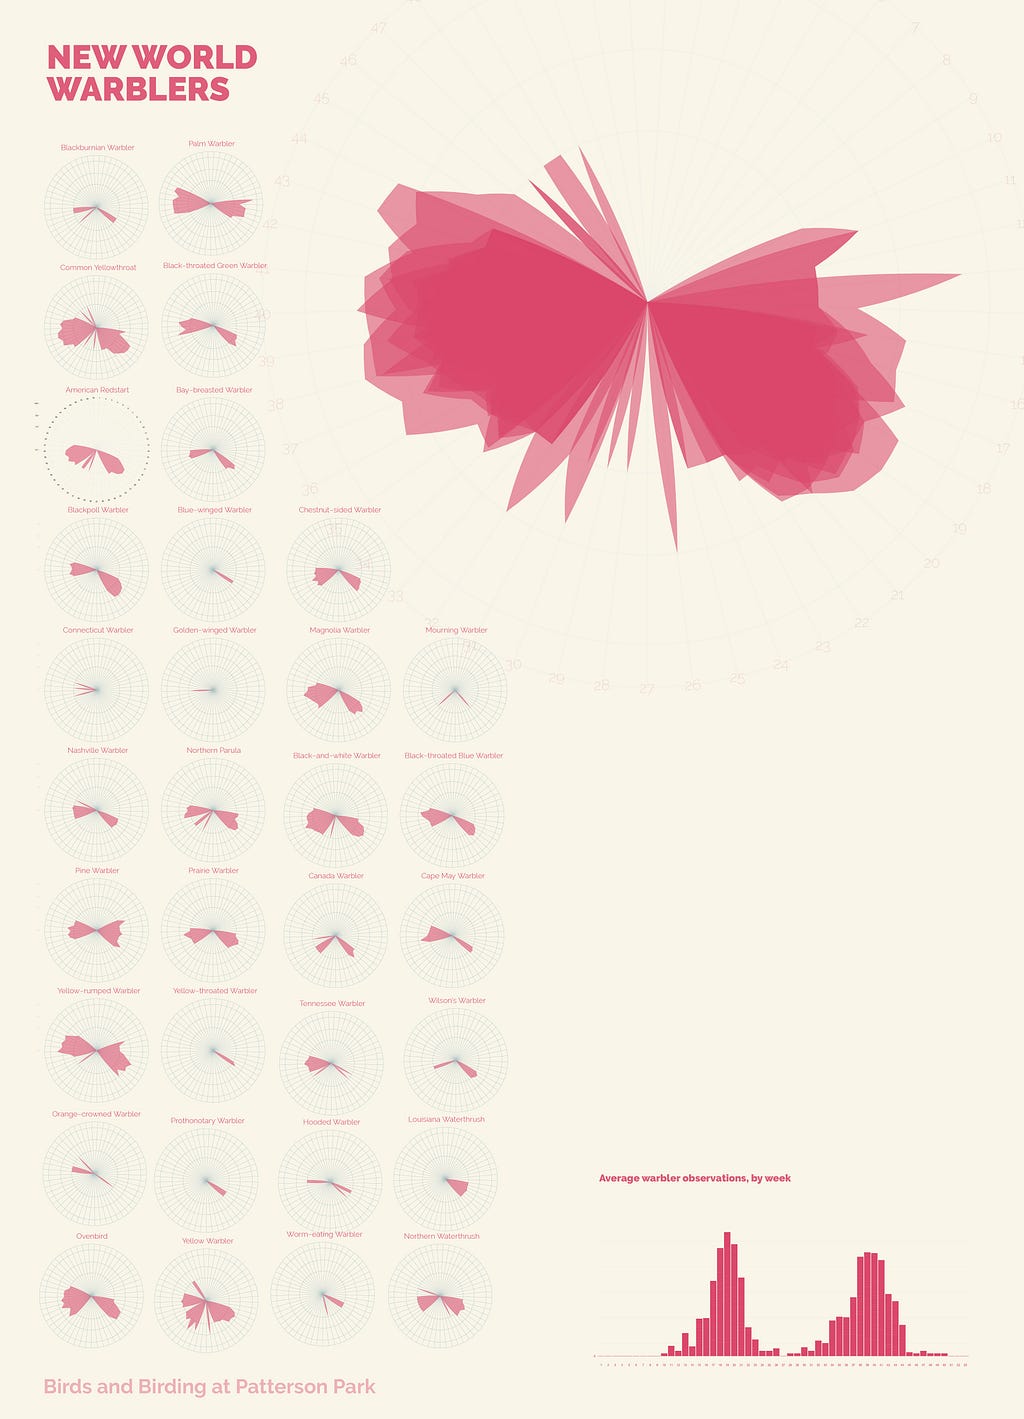 Pink radial area charts show the abundance of Warbler species at the park. Each radial is one species.